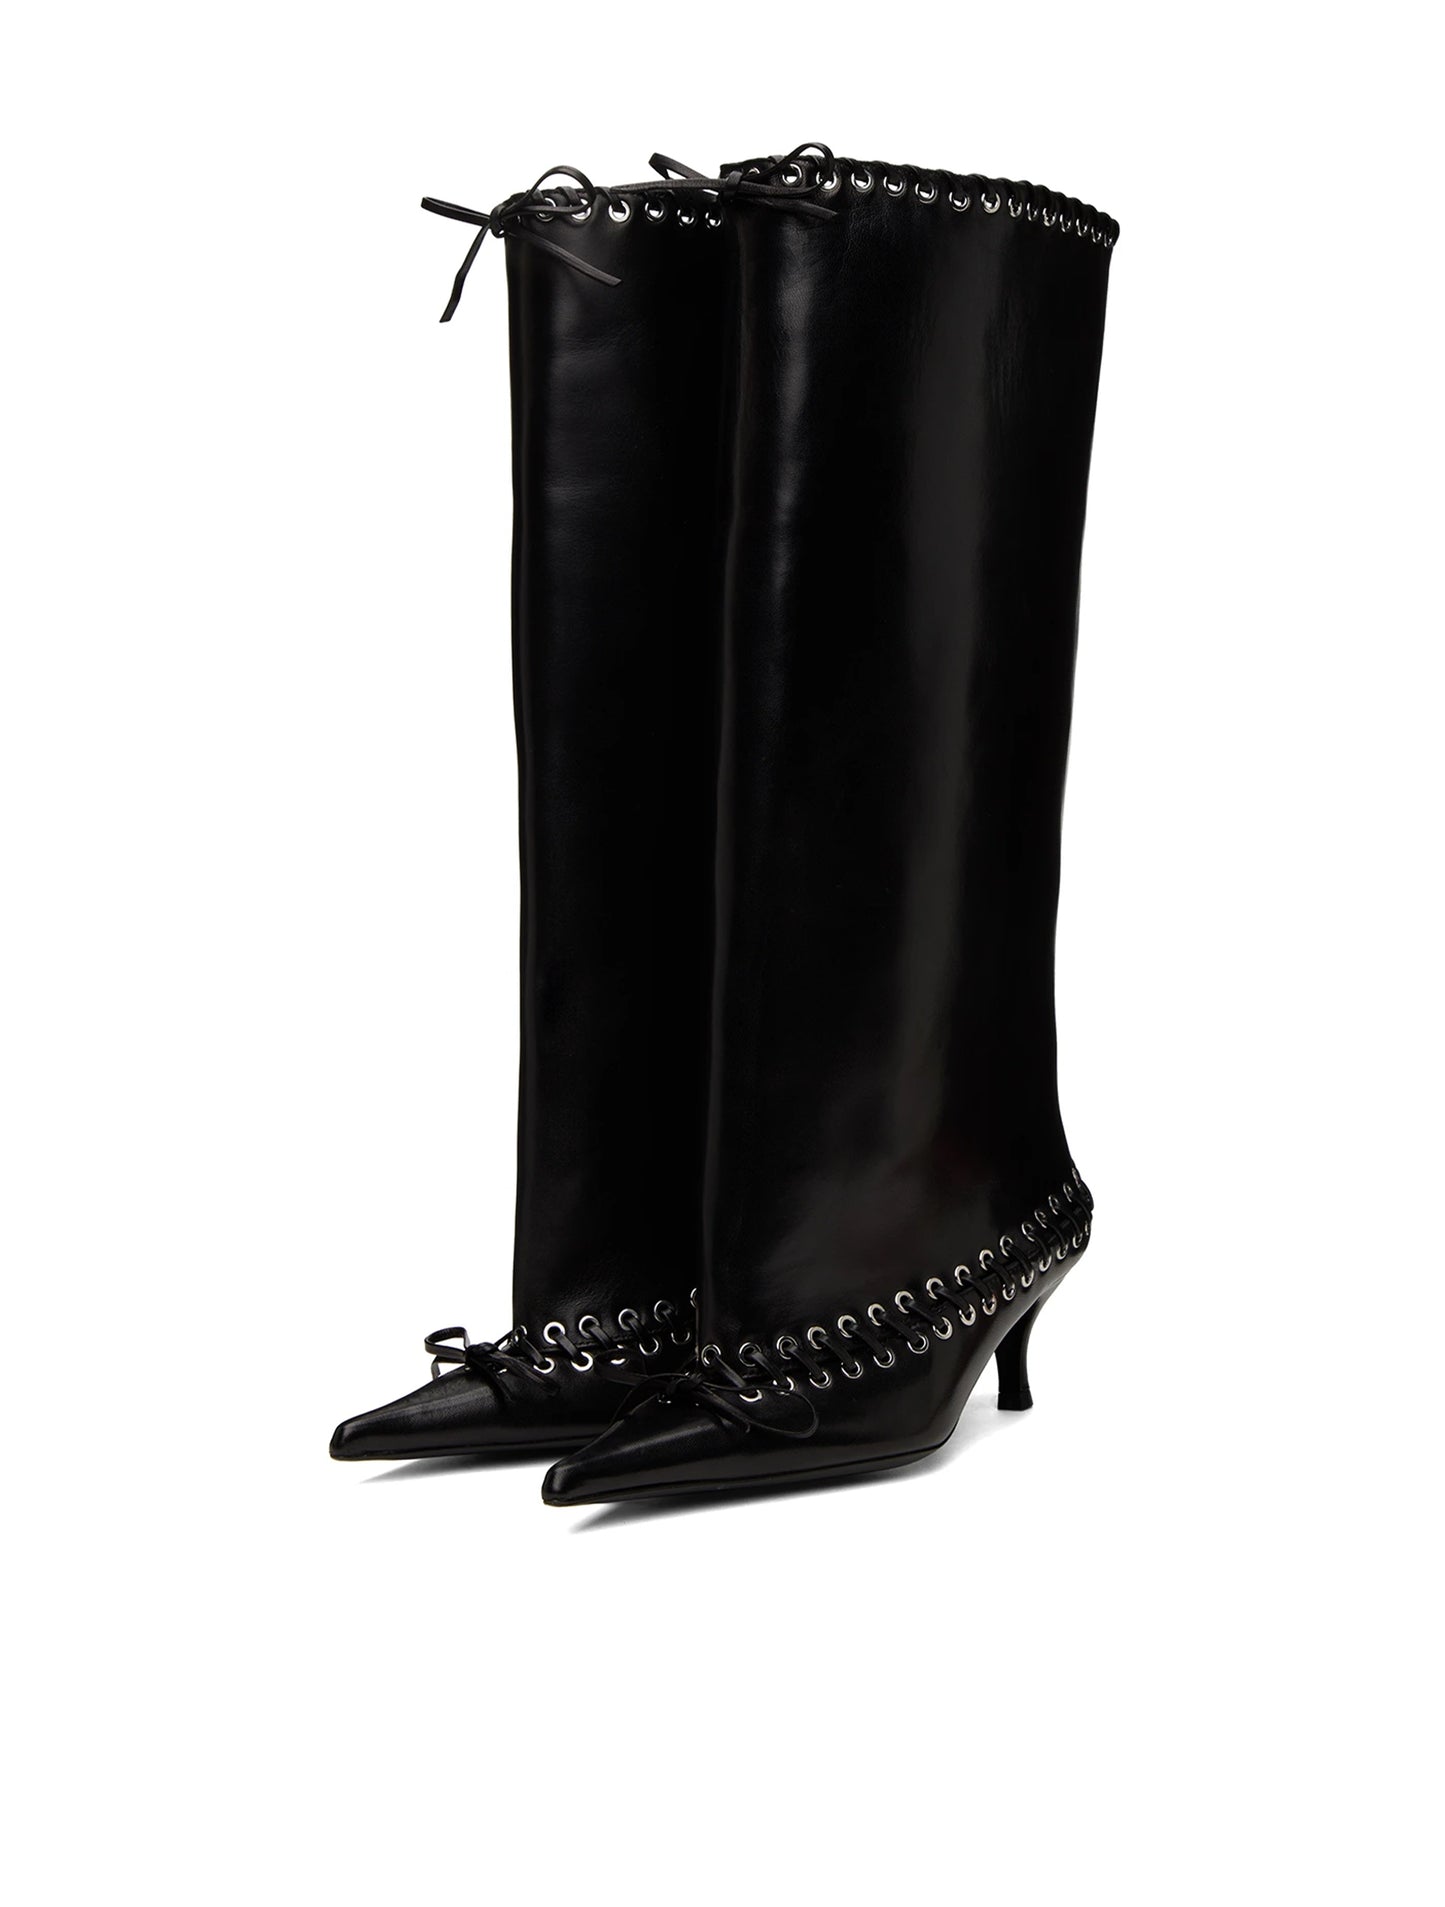 ALL-IN Knee High Level Boots